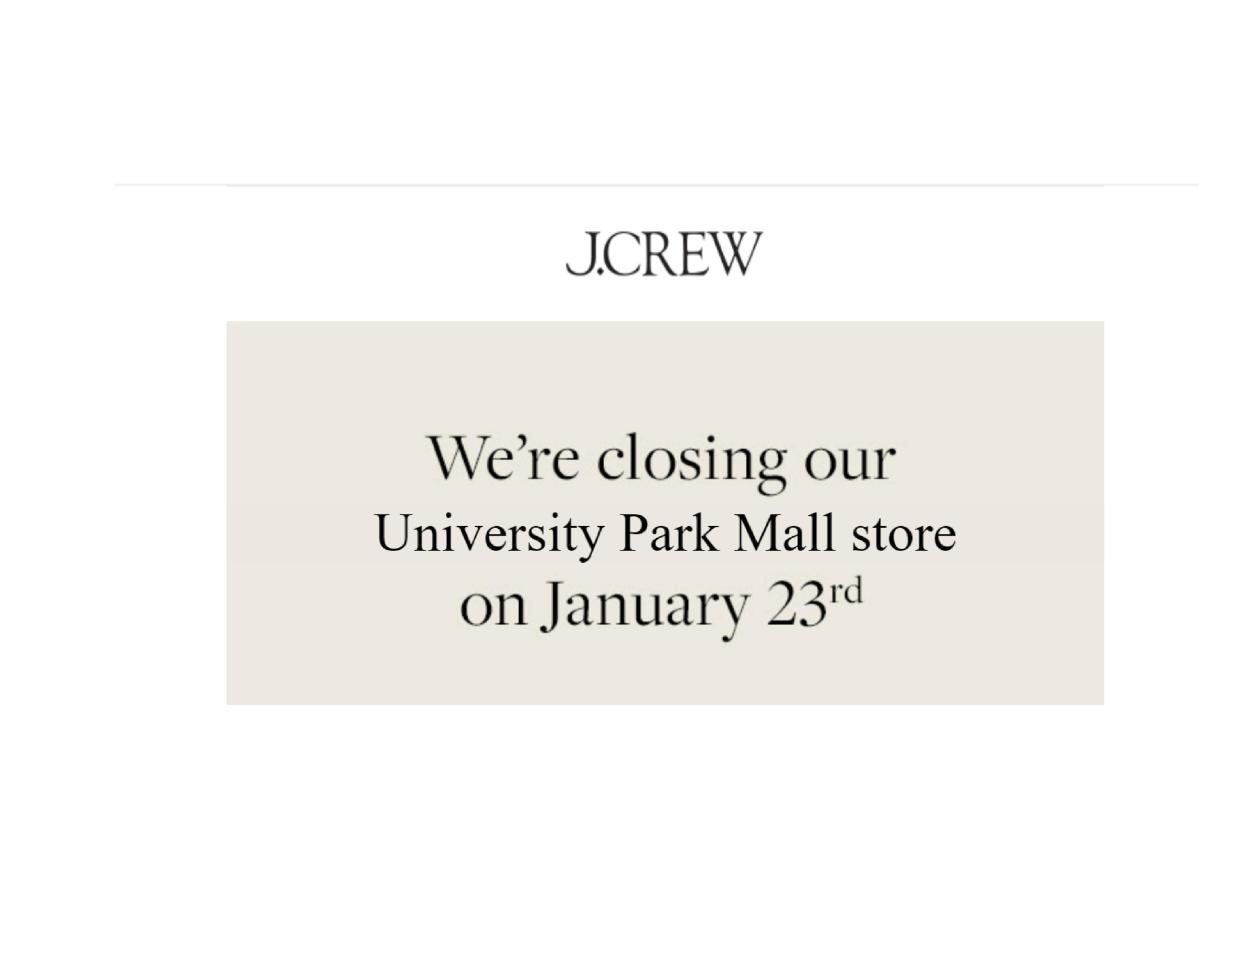 A screen shot of an email sent to customers announcing the retailer is closing.